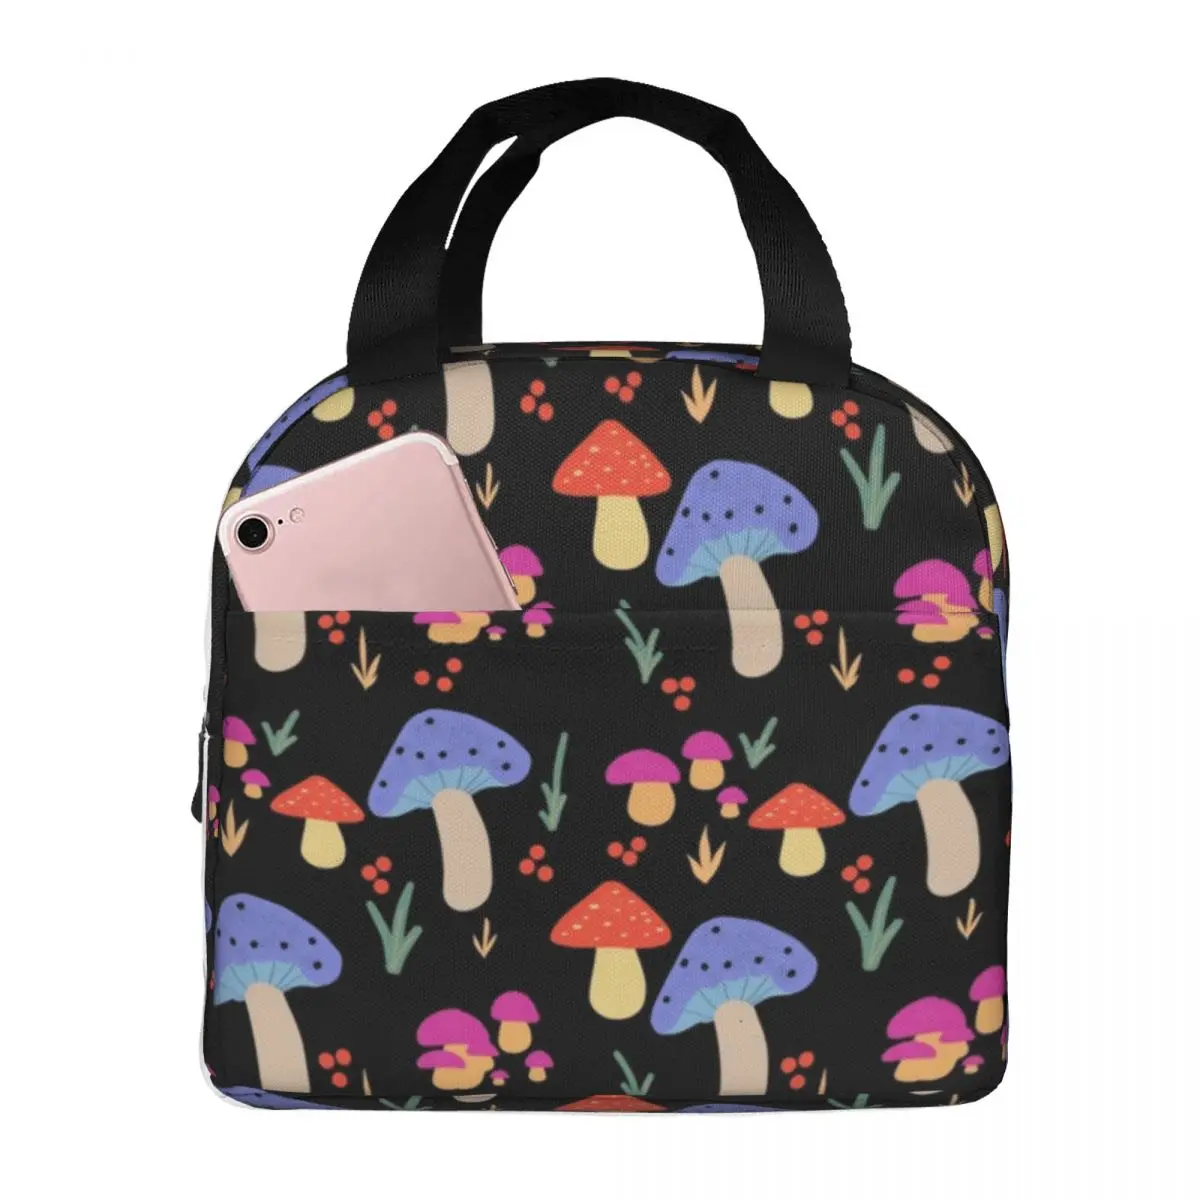 Lunch Bags for Women Kids Mushroom Pattern Thermal Cooler Portable Picnic Travel Psychedelic Canvas Lunch Box Food Storage Bags